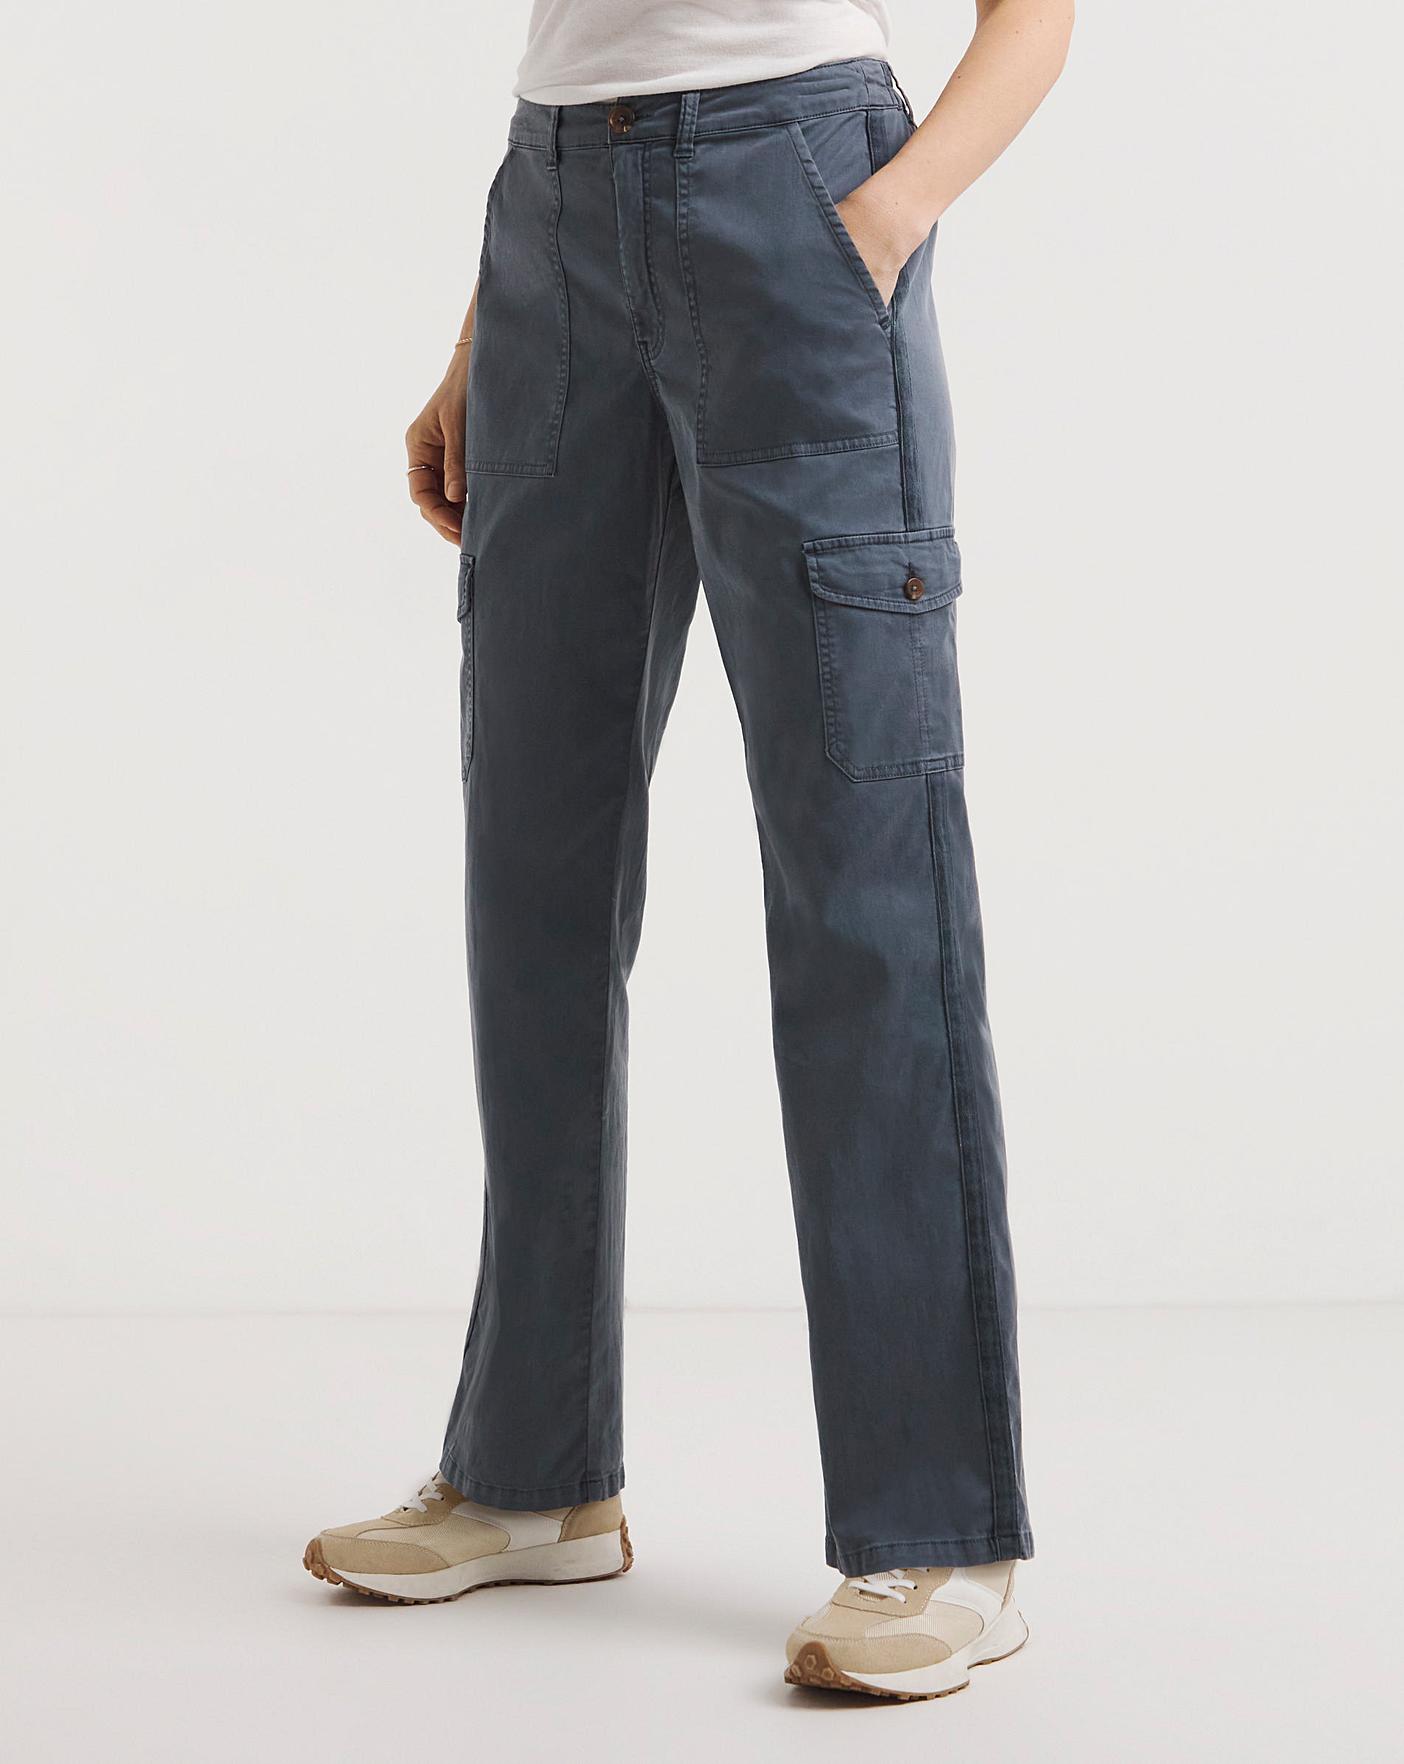 Discover 77+ jd williams mens trousers latest - in.cdgdbentre